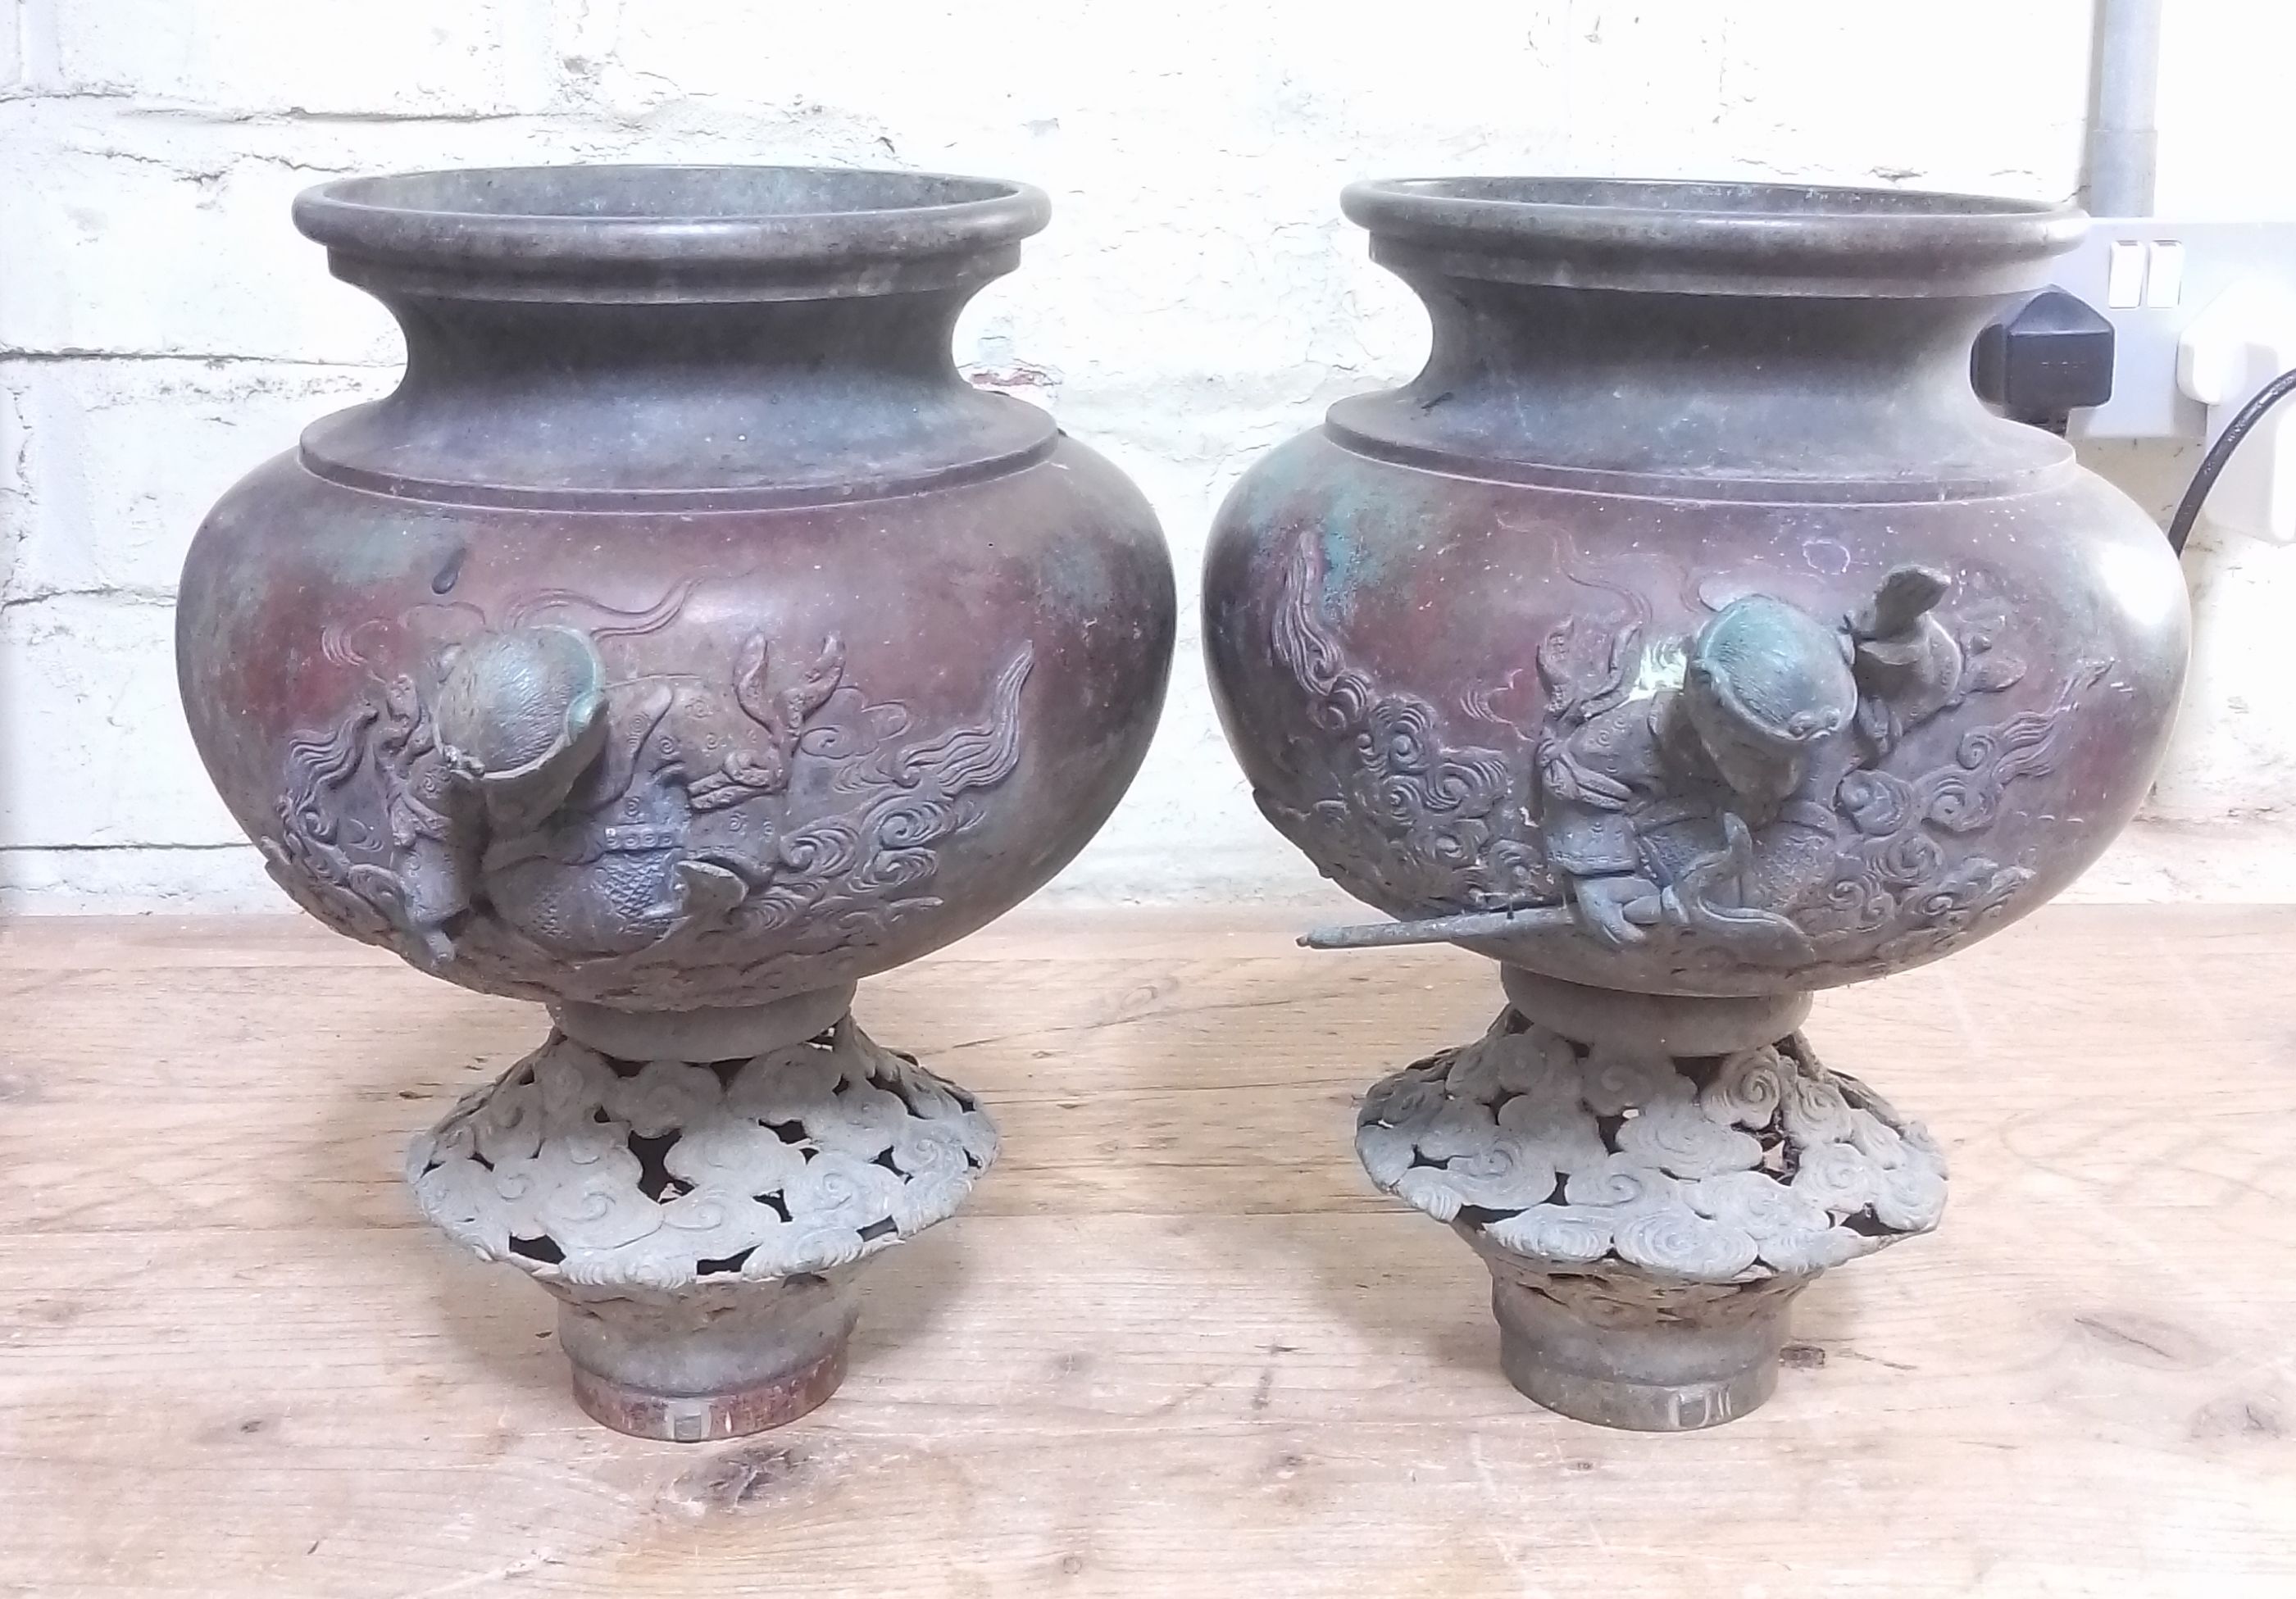 A pair of Chinese bronze vases or incense burners, bayonet fittings, possibly off a chariot or